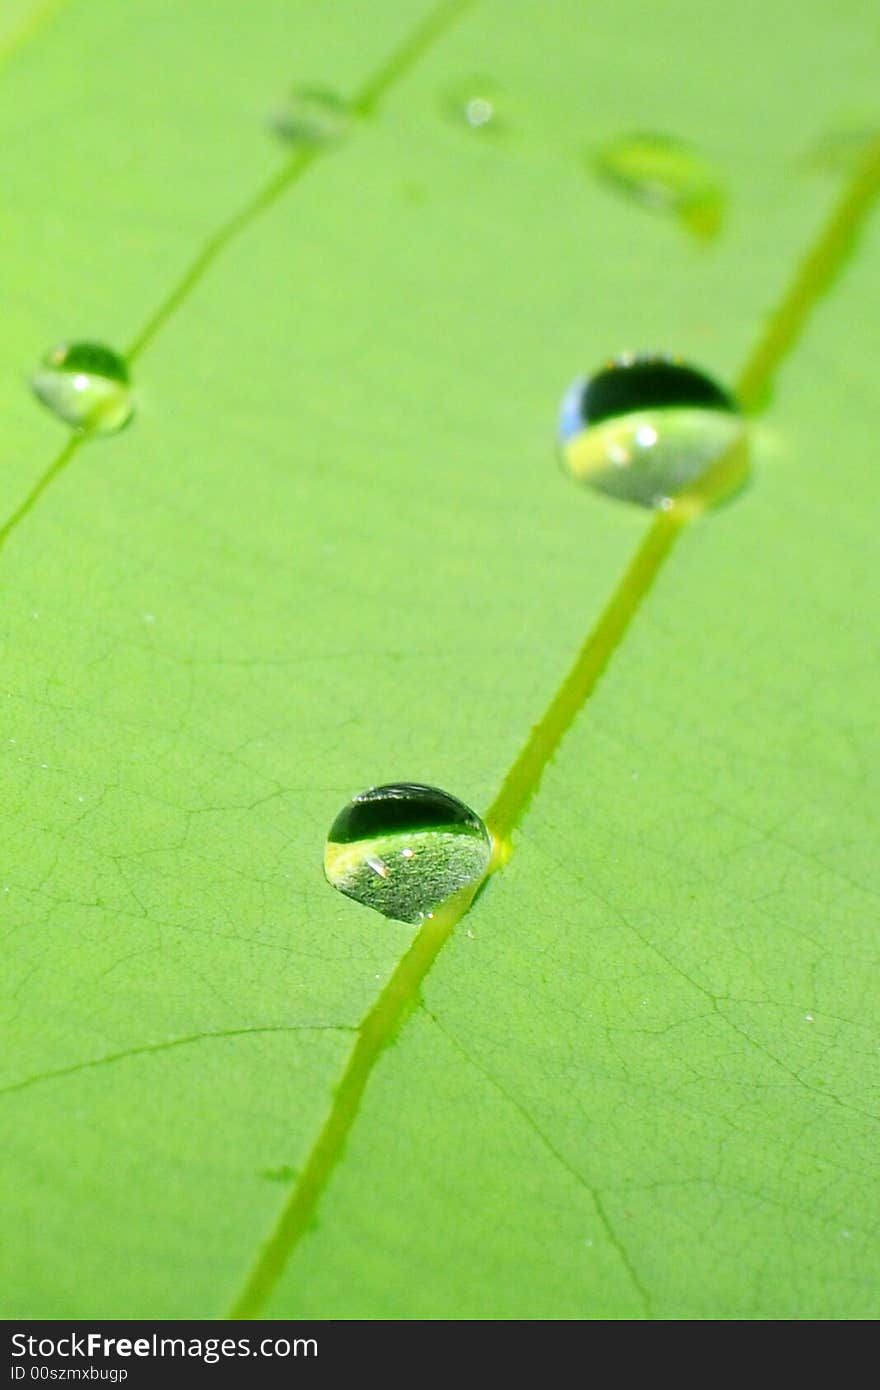 Droplets lining up along the leaf's vein. Droplets lining up along the leaf's vein